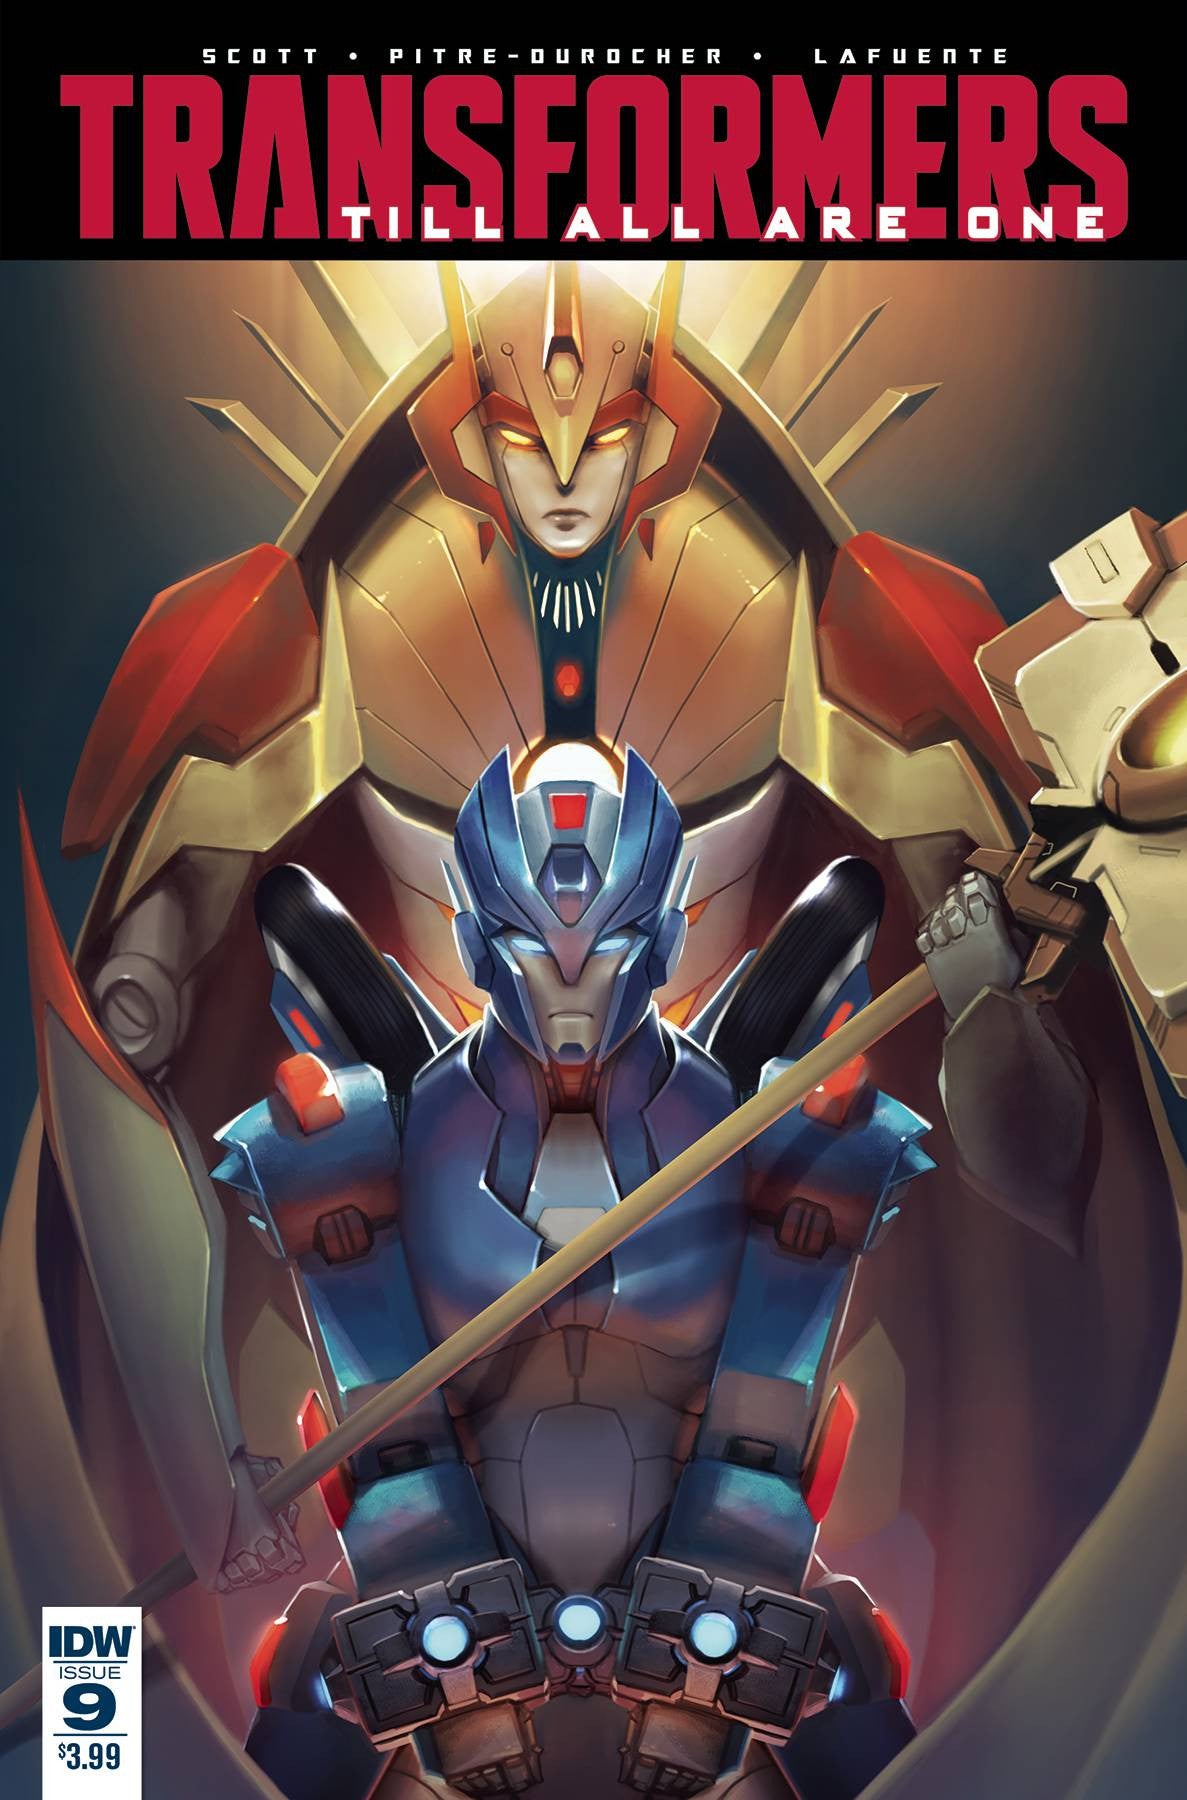 TRANSFORMERS TILL ALL ARE ONE #9 COVER